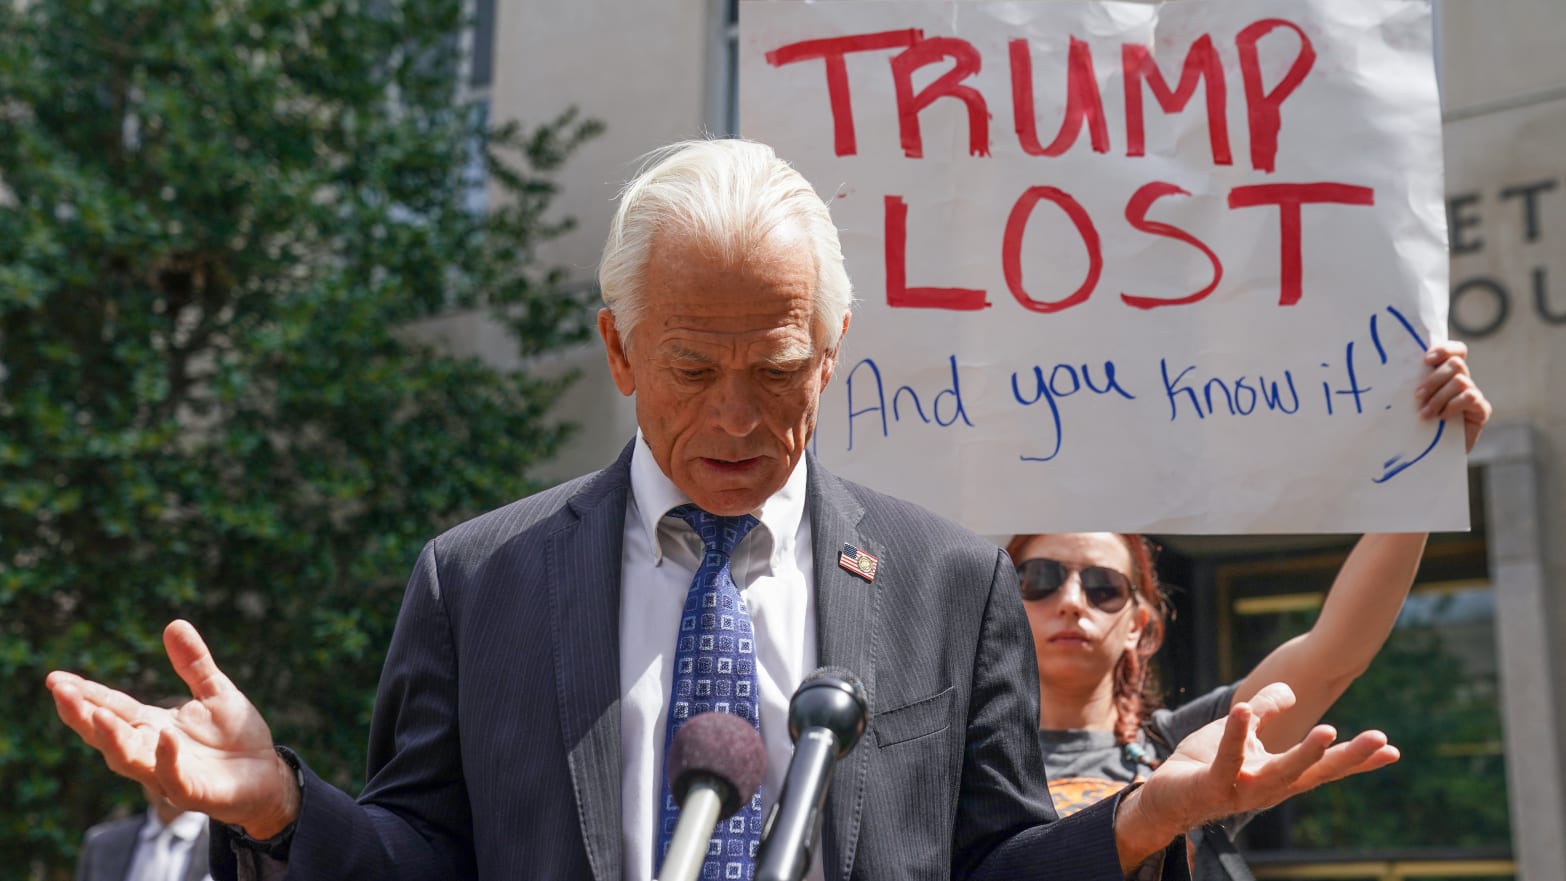 Peter Navarro, wearing a suit, stares down during a press conference where he was heckled by a protester holding a “TRUMP LOST” sign.